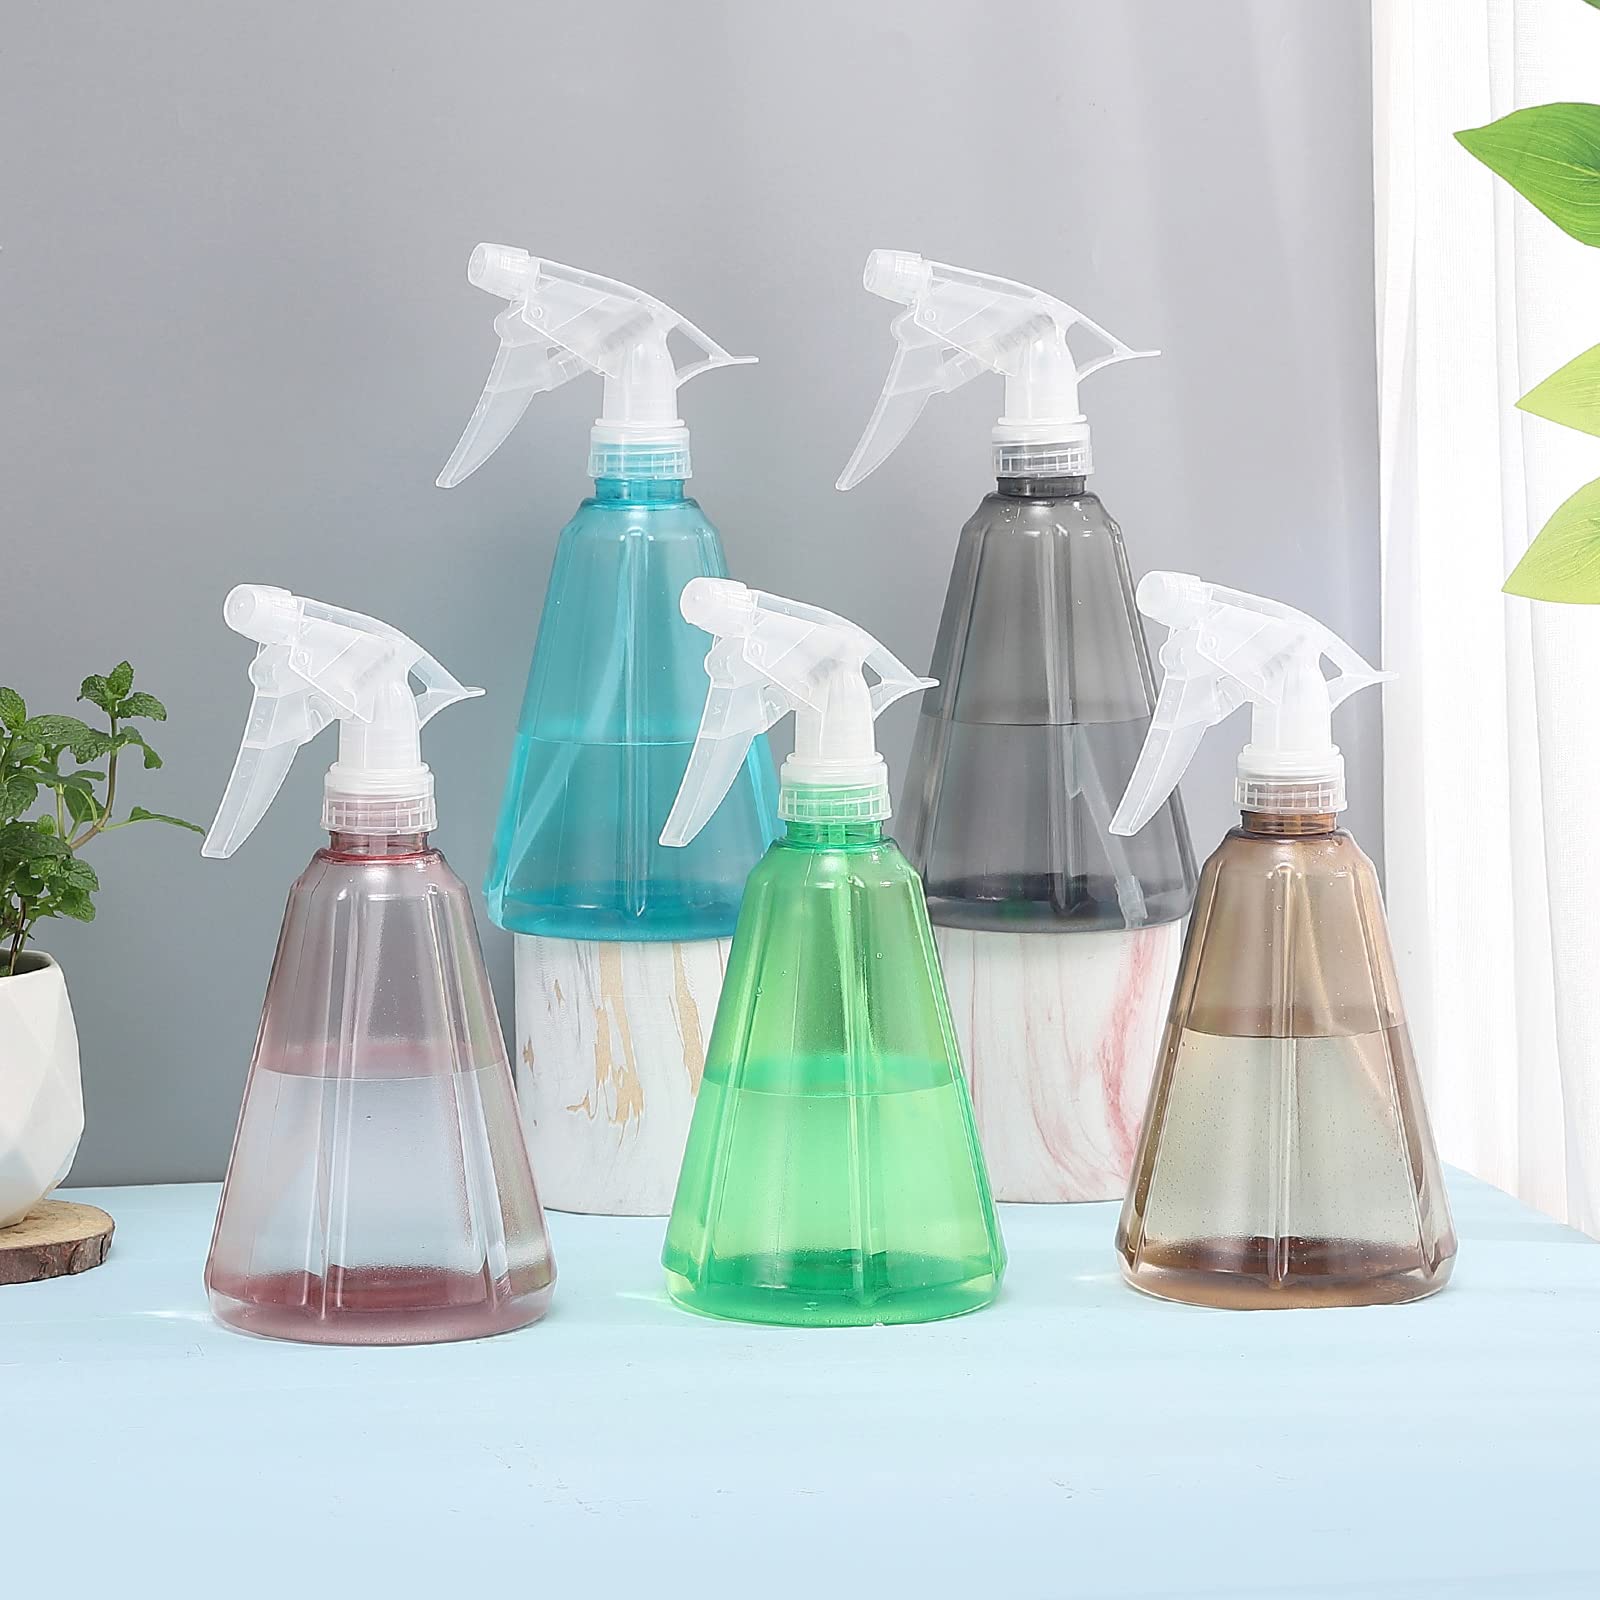 Spray Bottles Pack of 5 Water Squirt Bottle 17 oz Adjustable Empty Plastic Storage Container for Cleaning Solutions, Gardening, Pets, Plants, Hair Misting, Leak Proof, BPA Free, 5 Colors